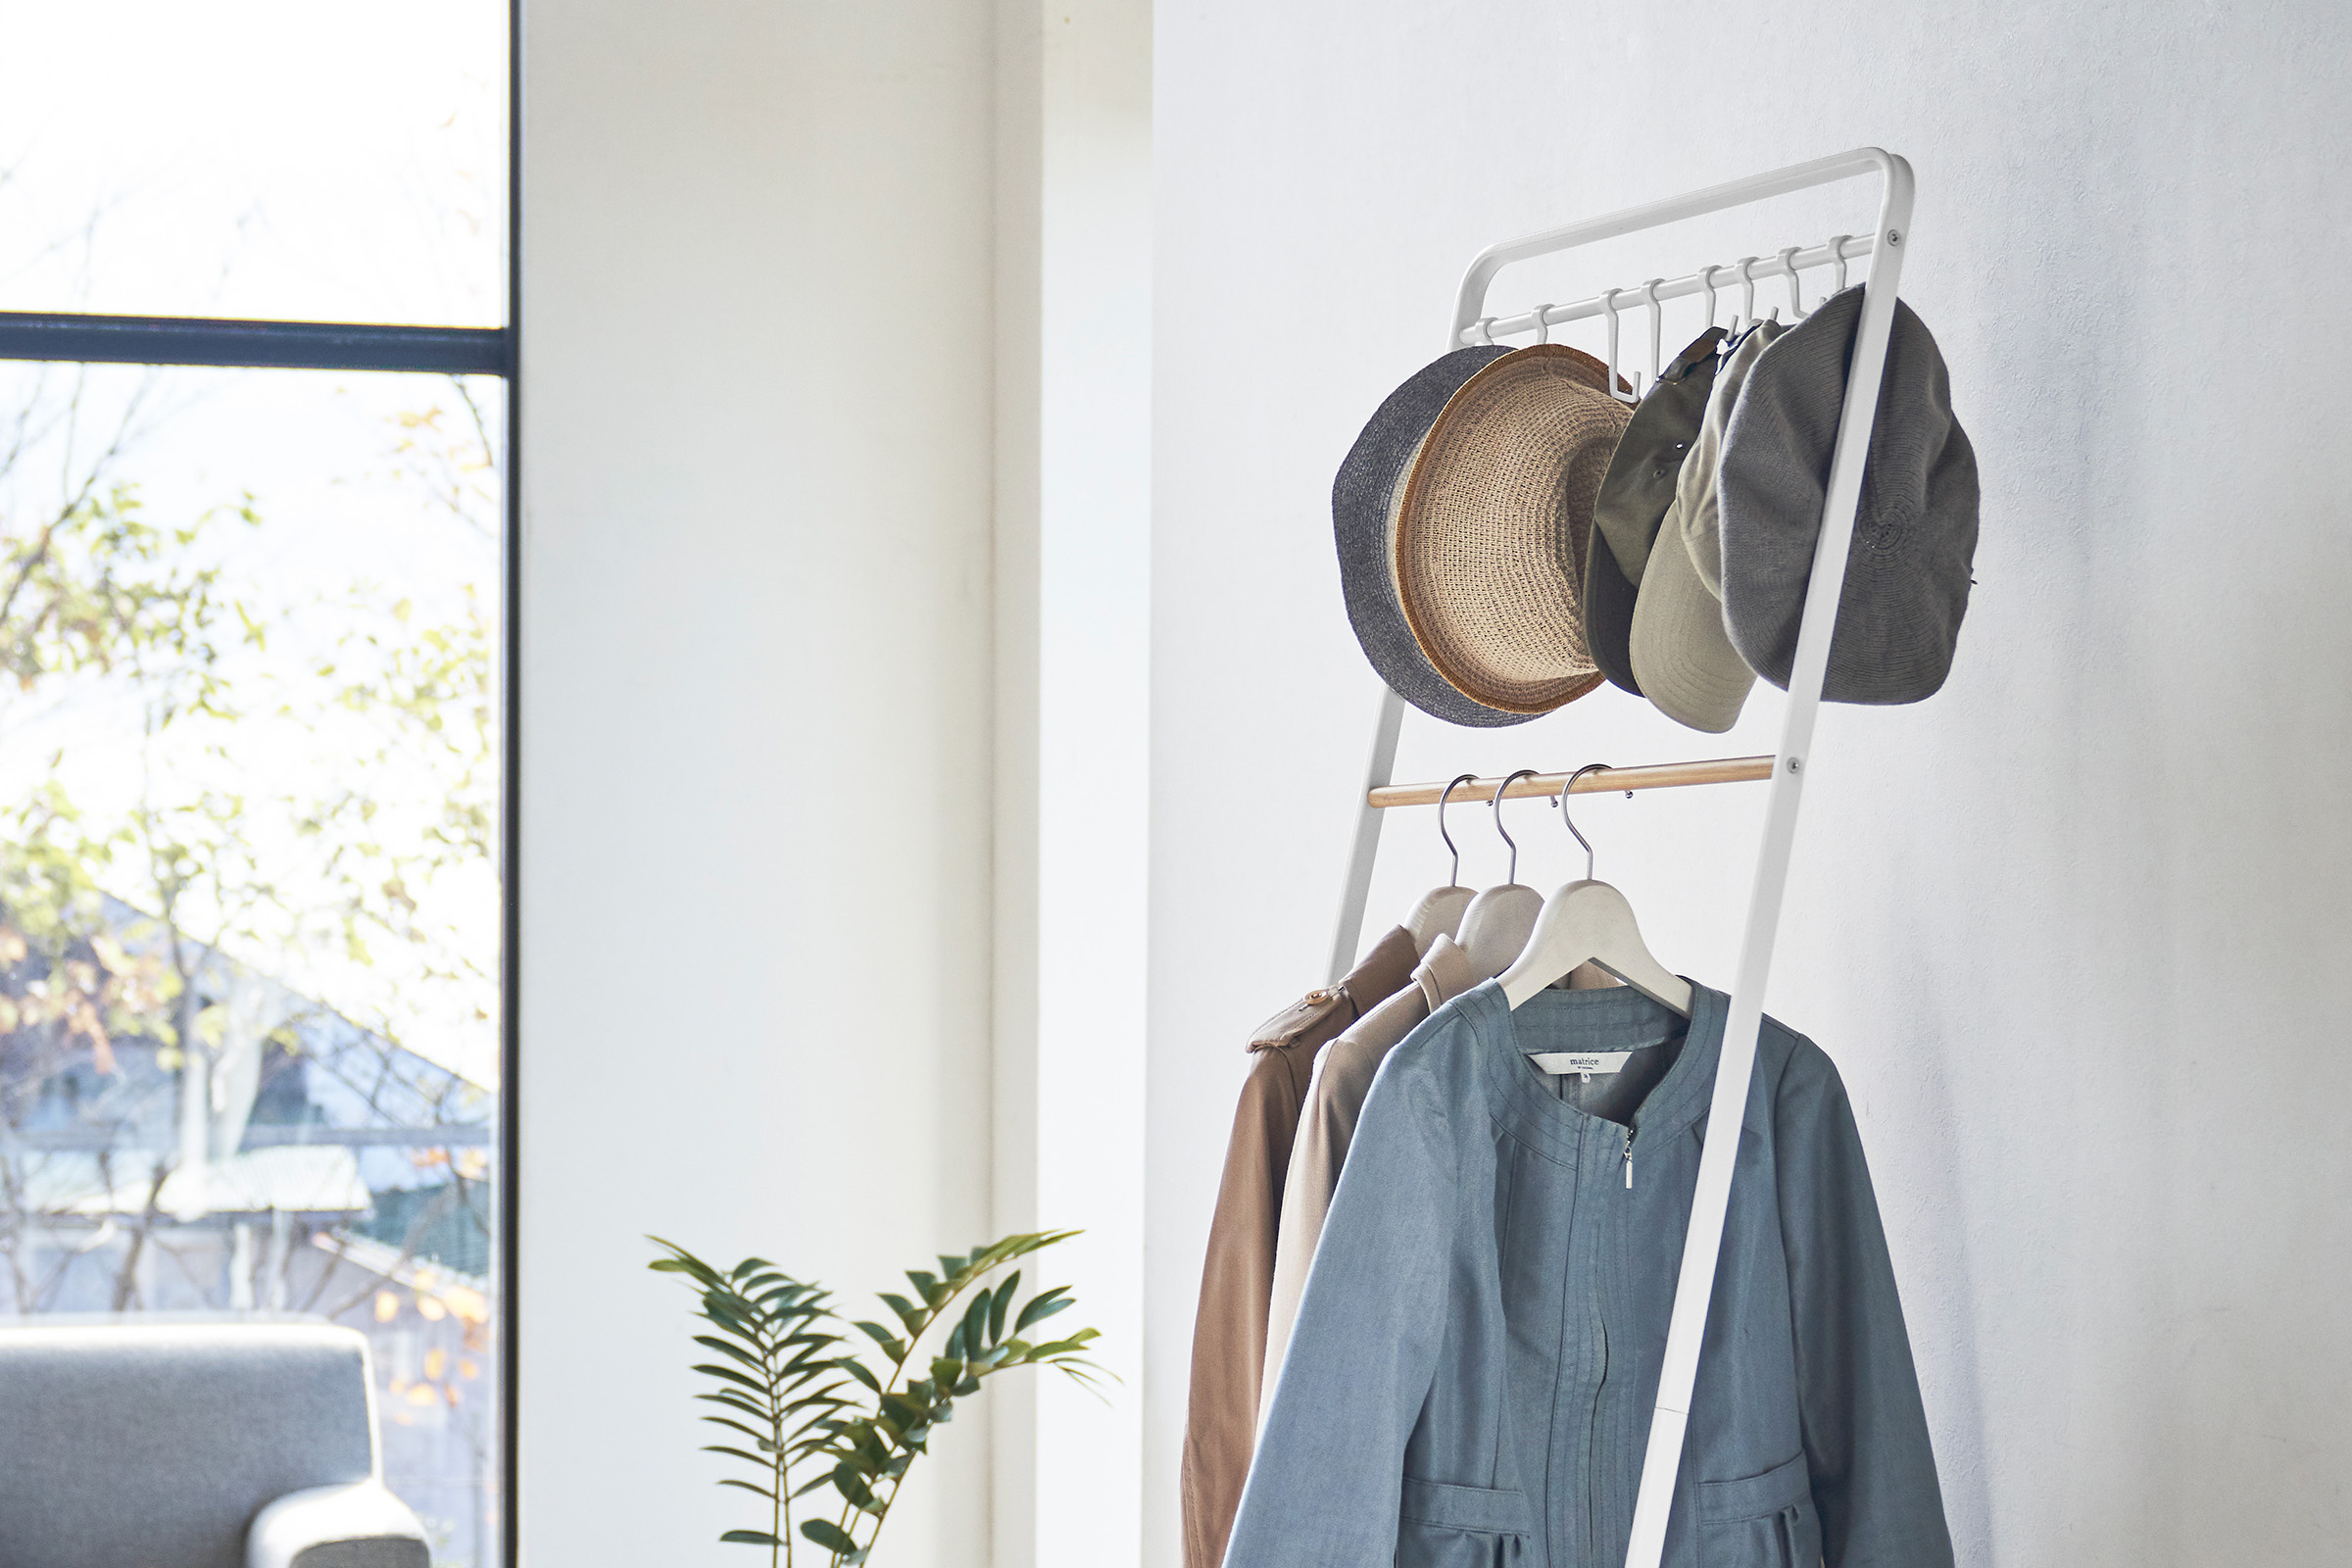 The top half of Coat Rack with Hat Storage by Yamazaki Home in white holding a number of tops on the bottom rack and hats on the hooks above.